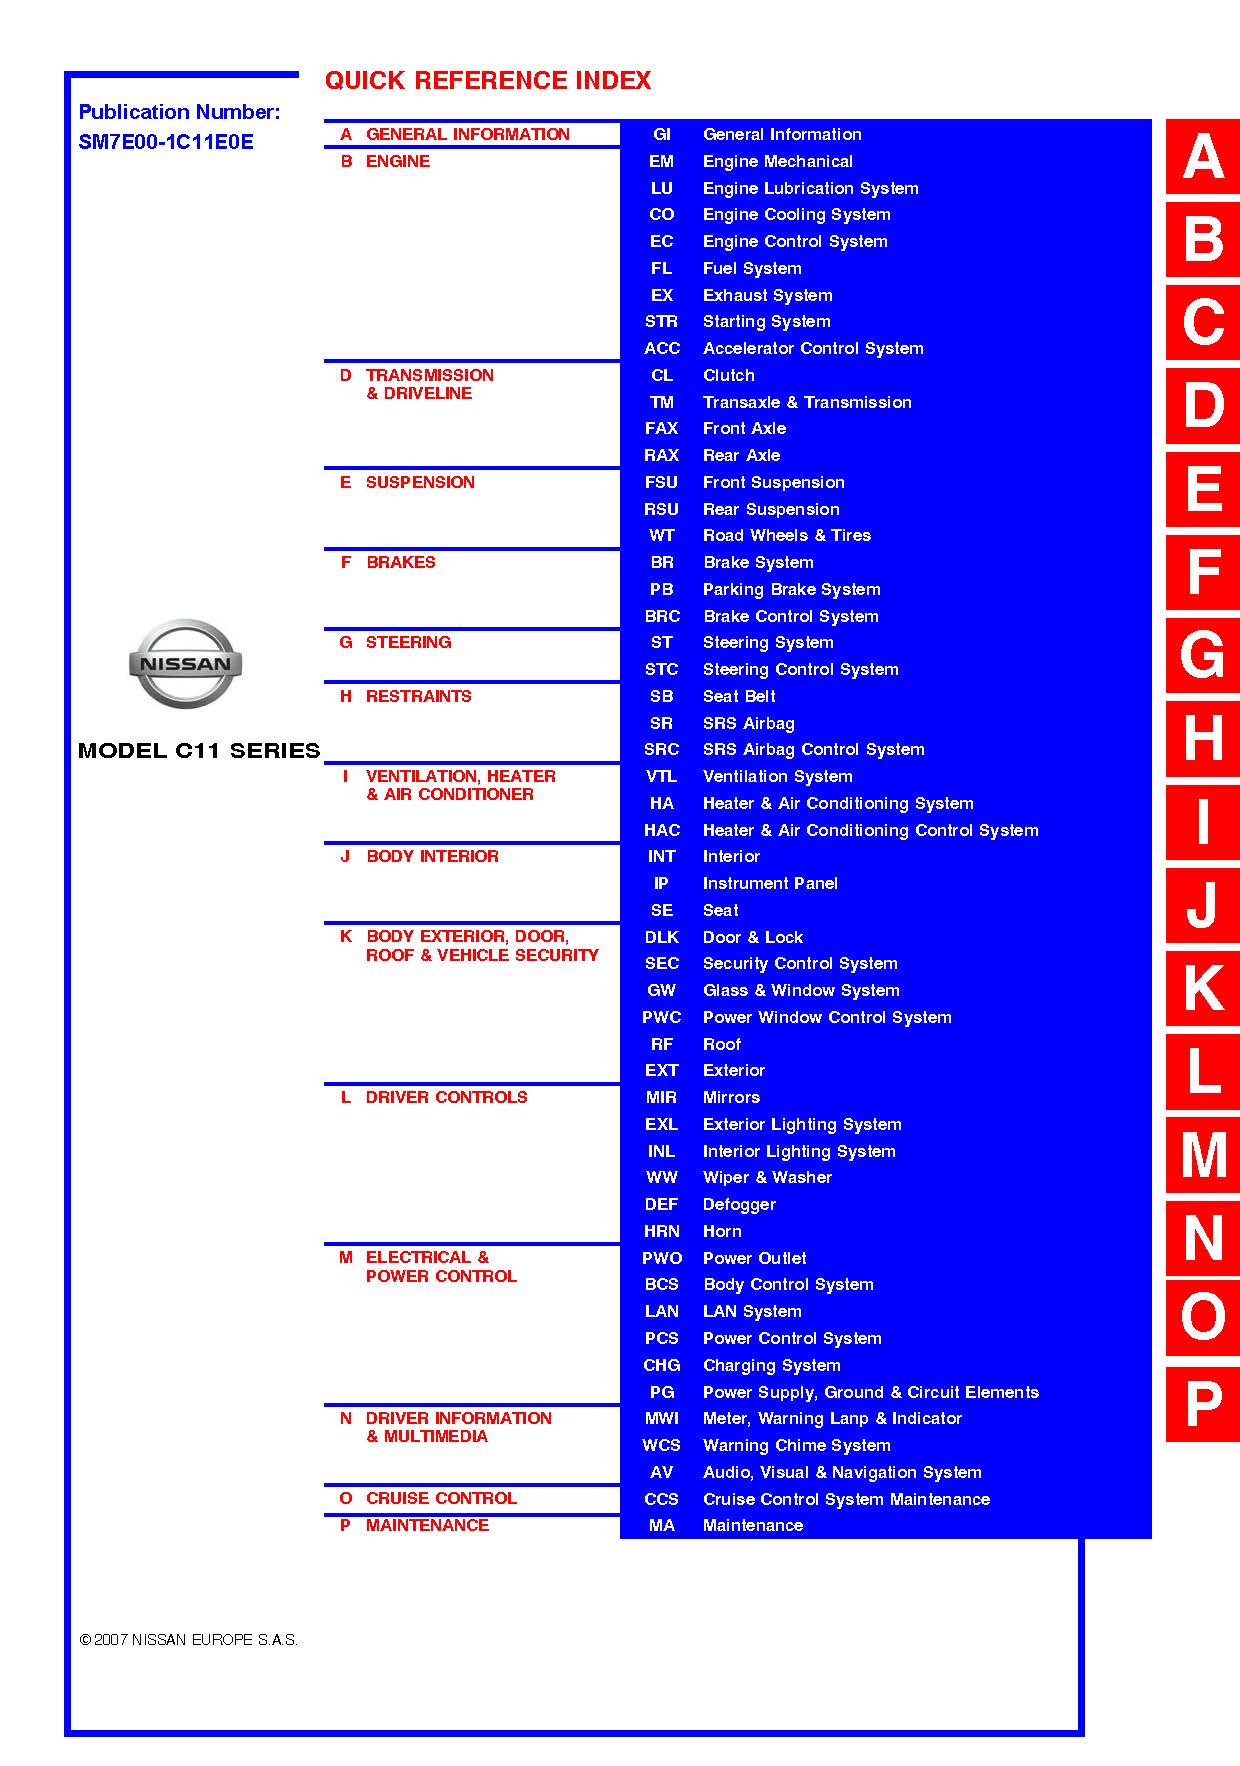 Table of Contents 2008 Nissan Tiida Repair Manual